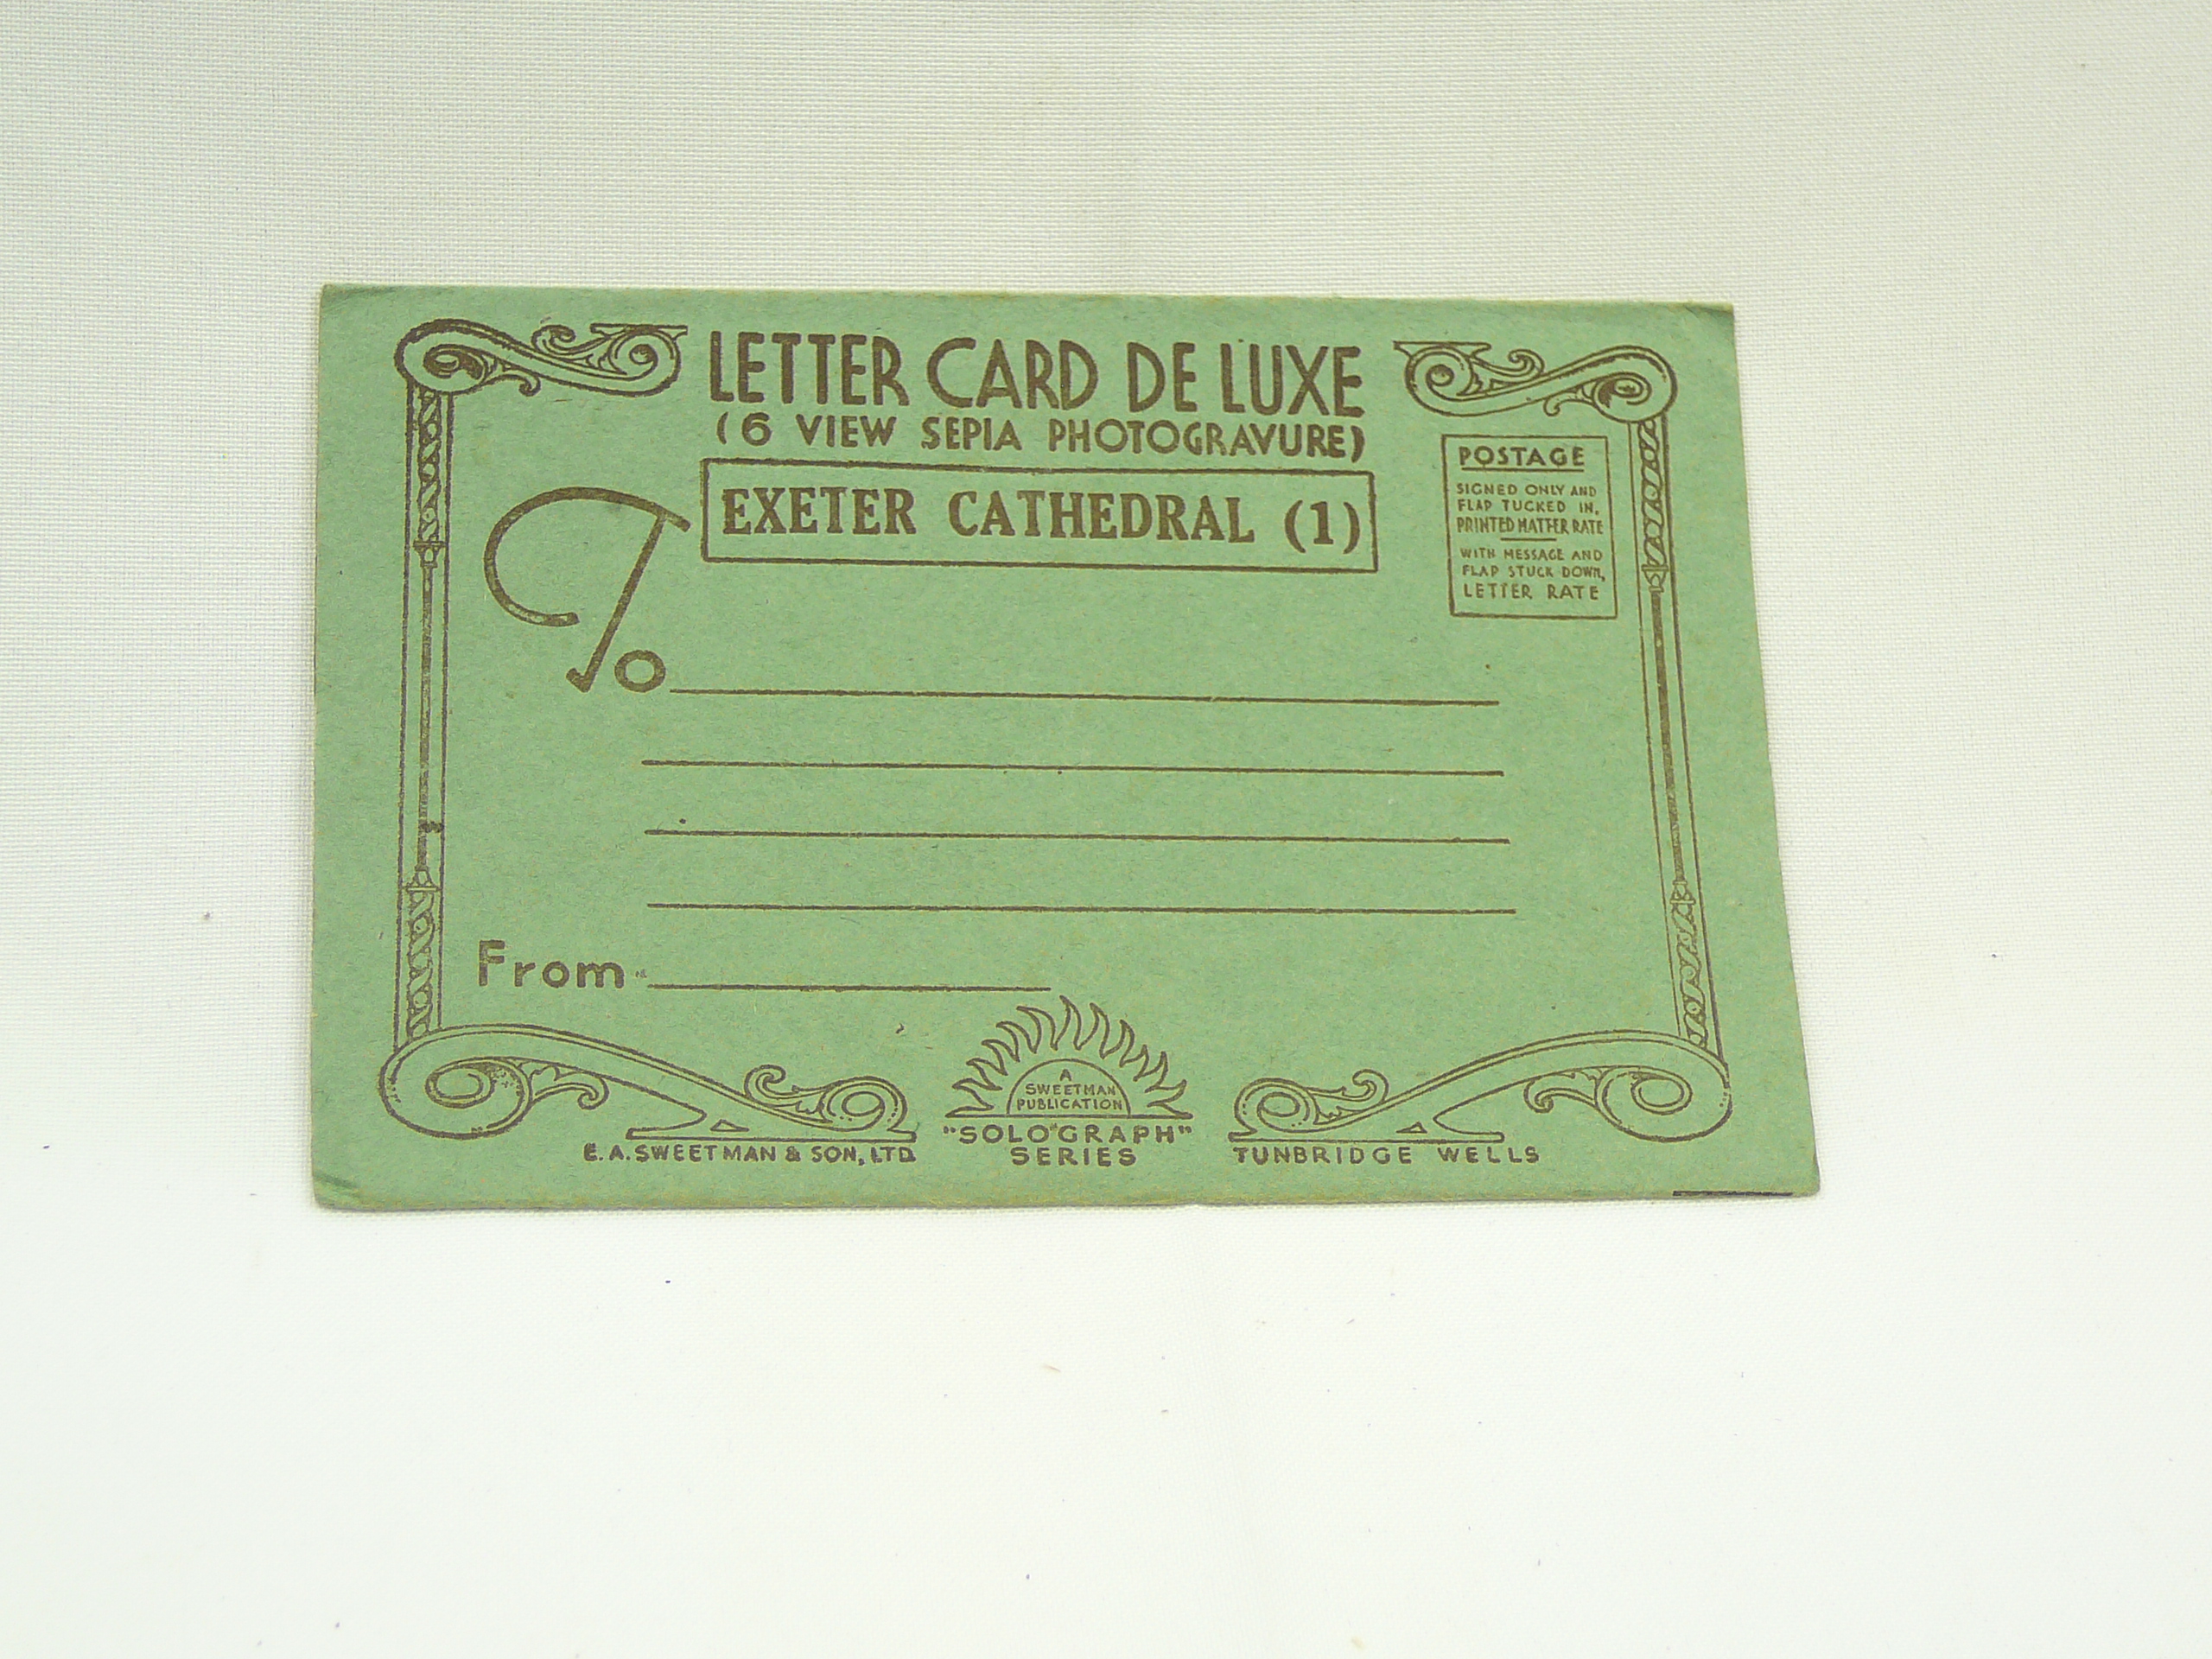 Exeter album letter card - Image 2 of 2